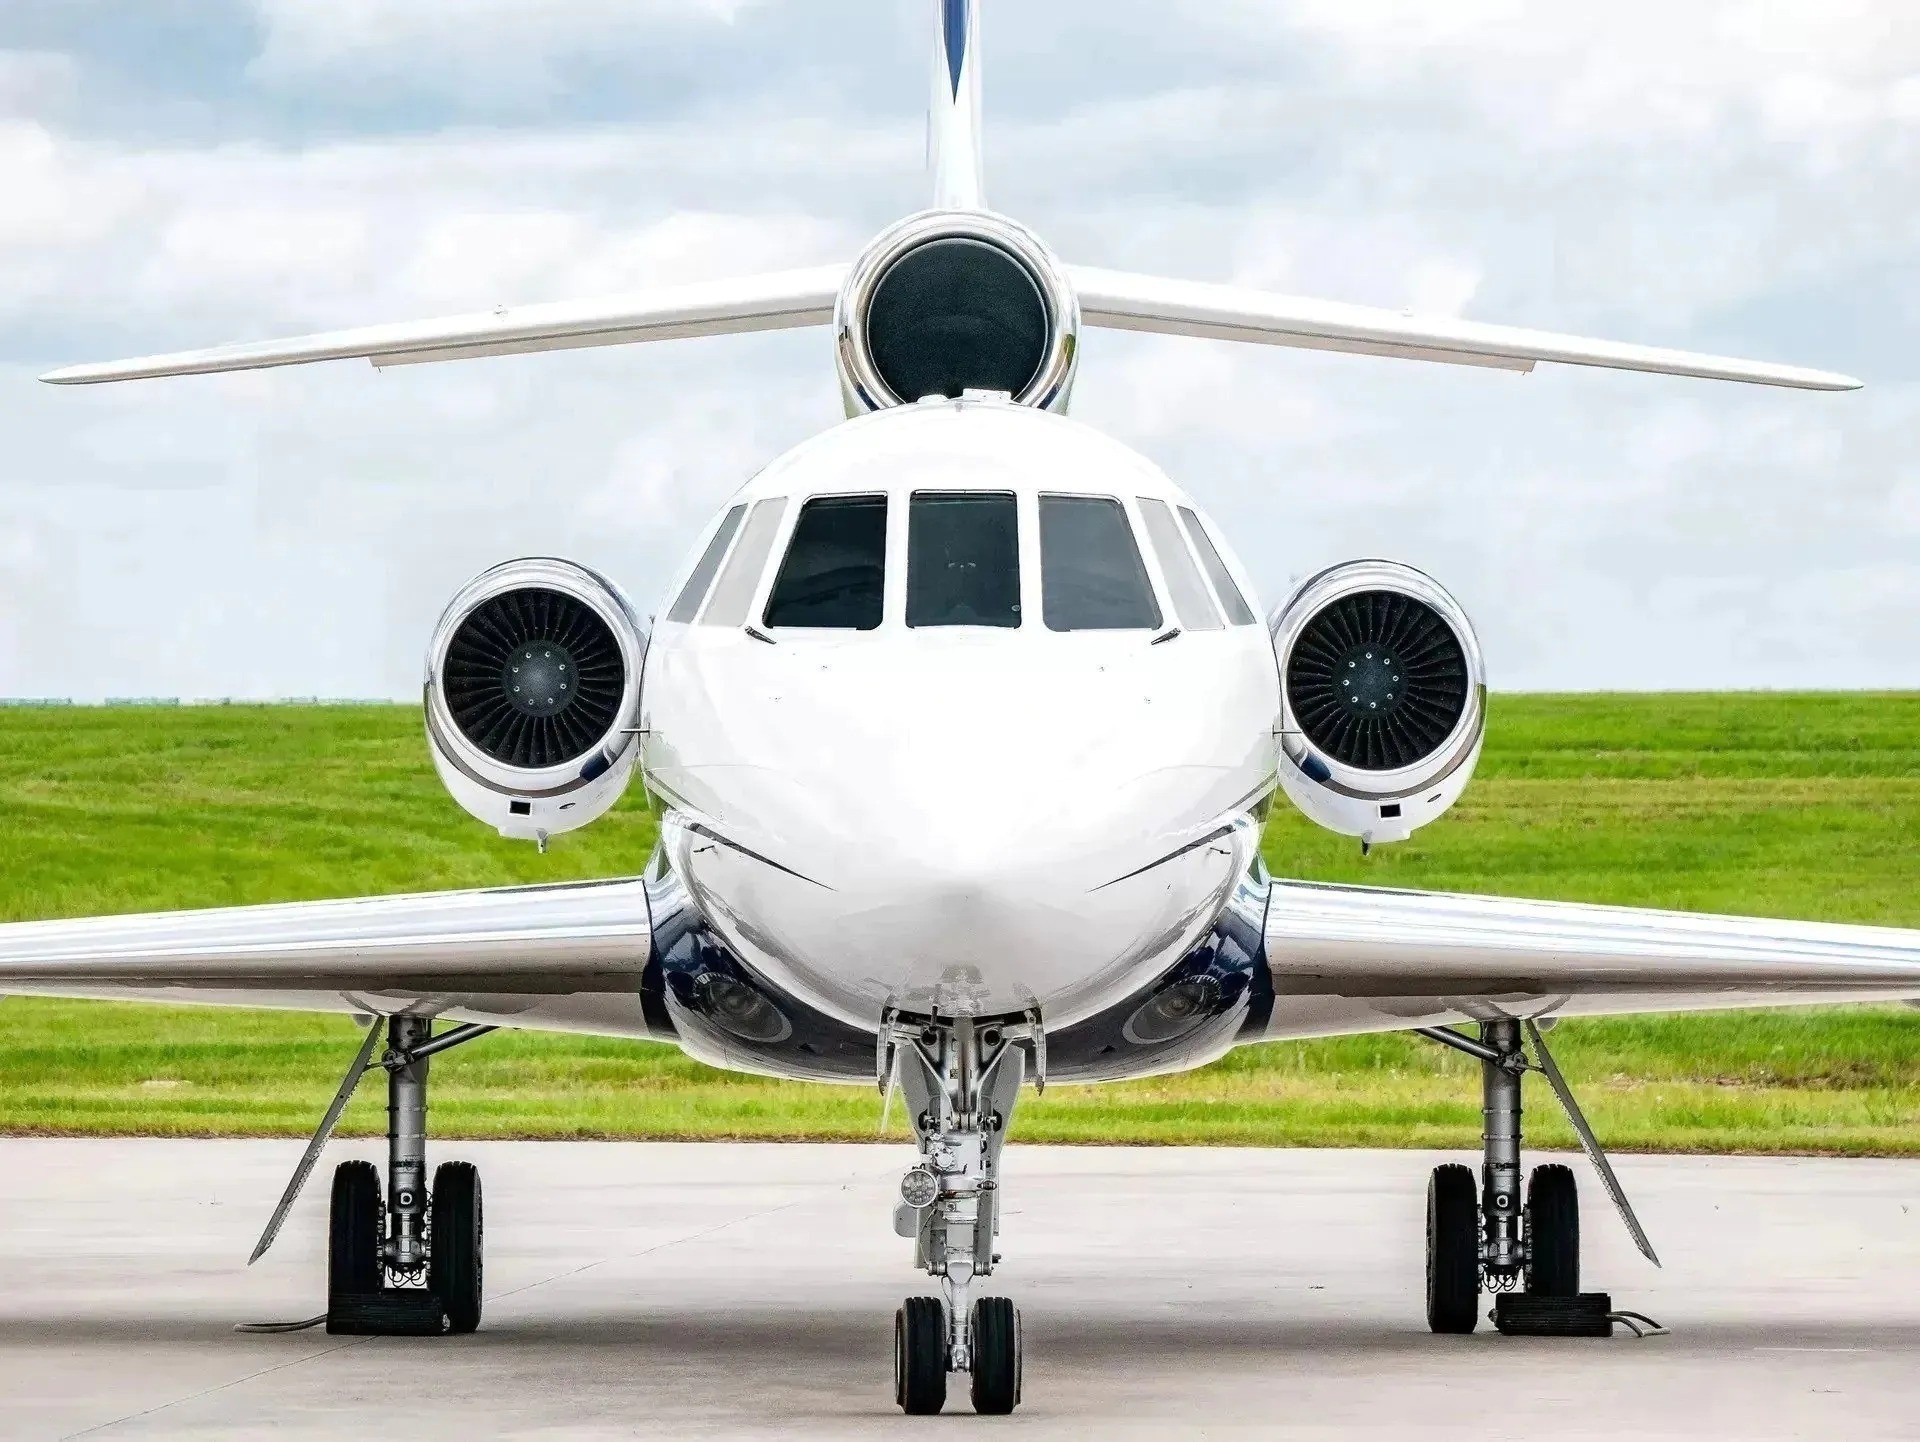 Cherry Hills Village Private Jet and Air Charter Flights